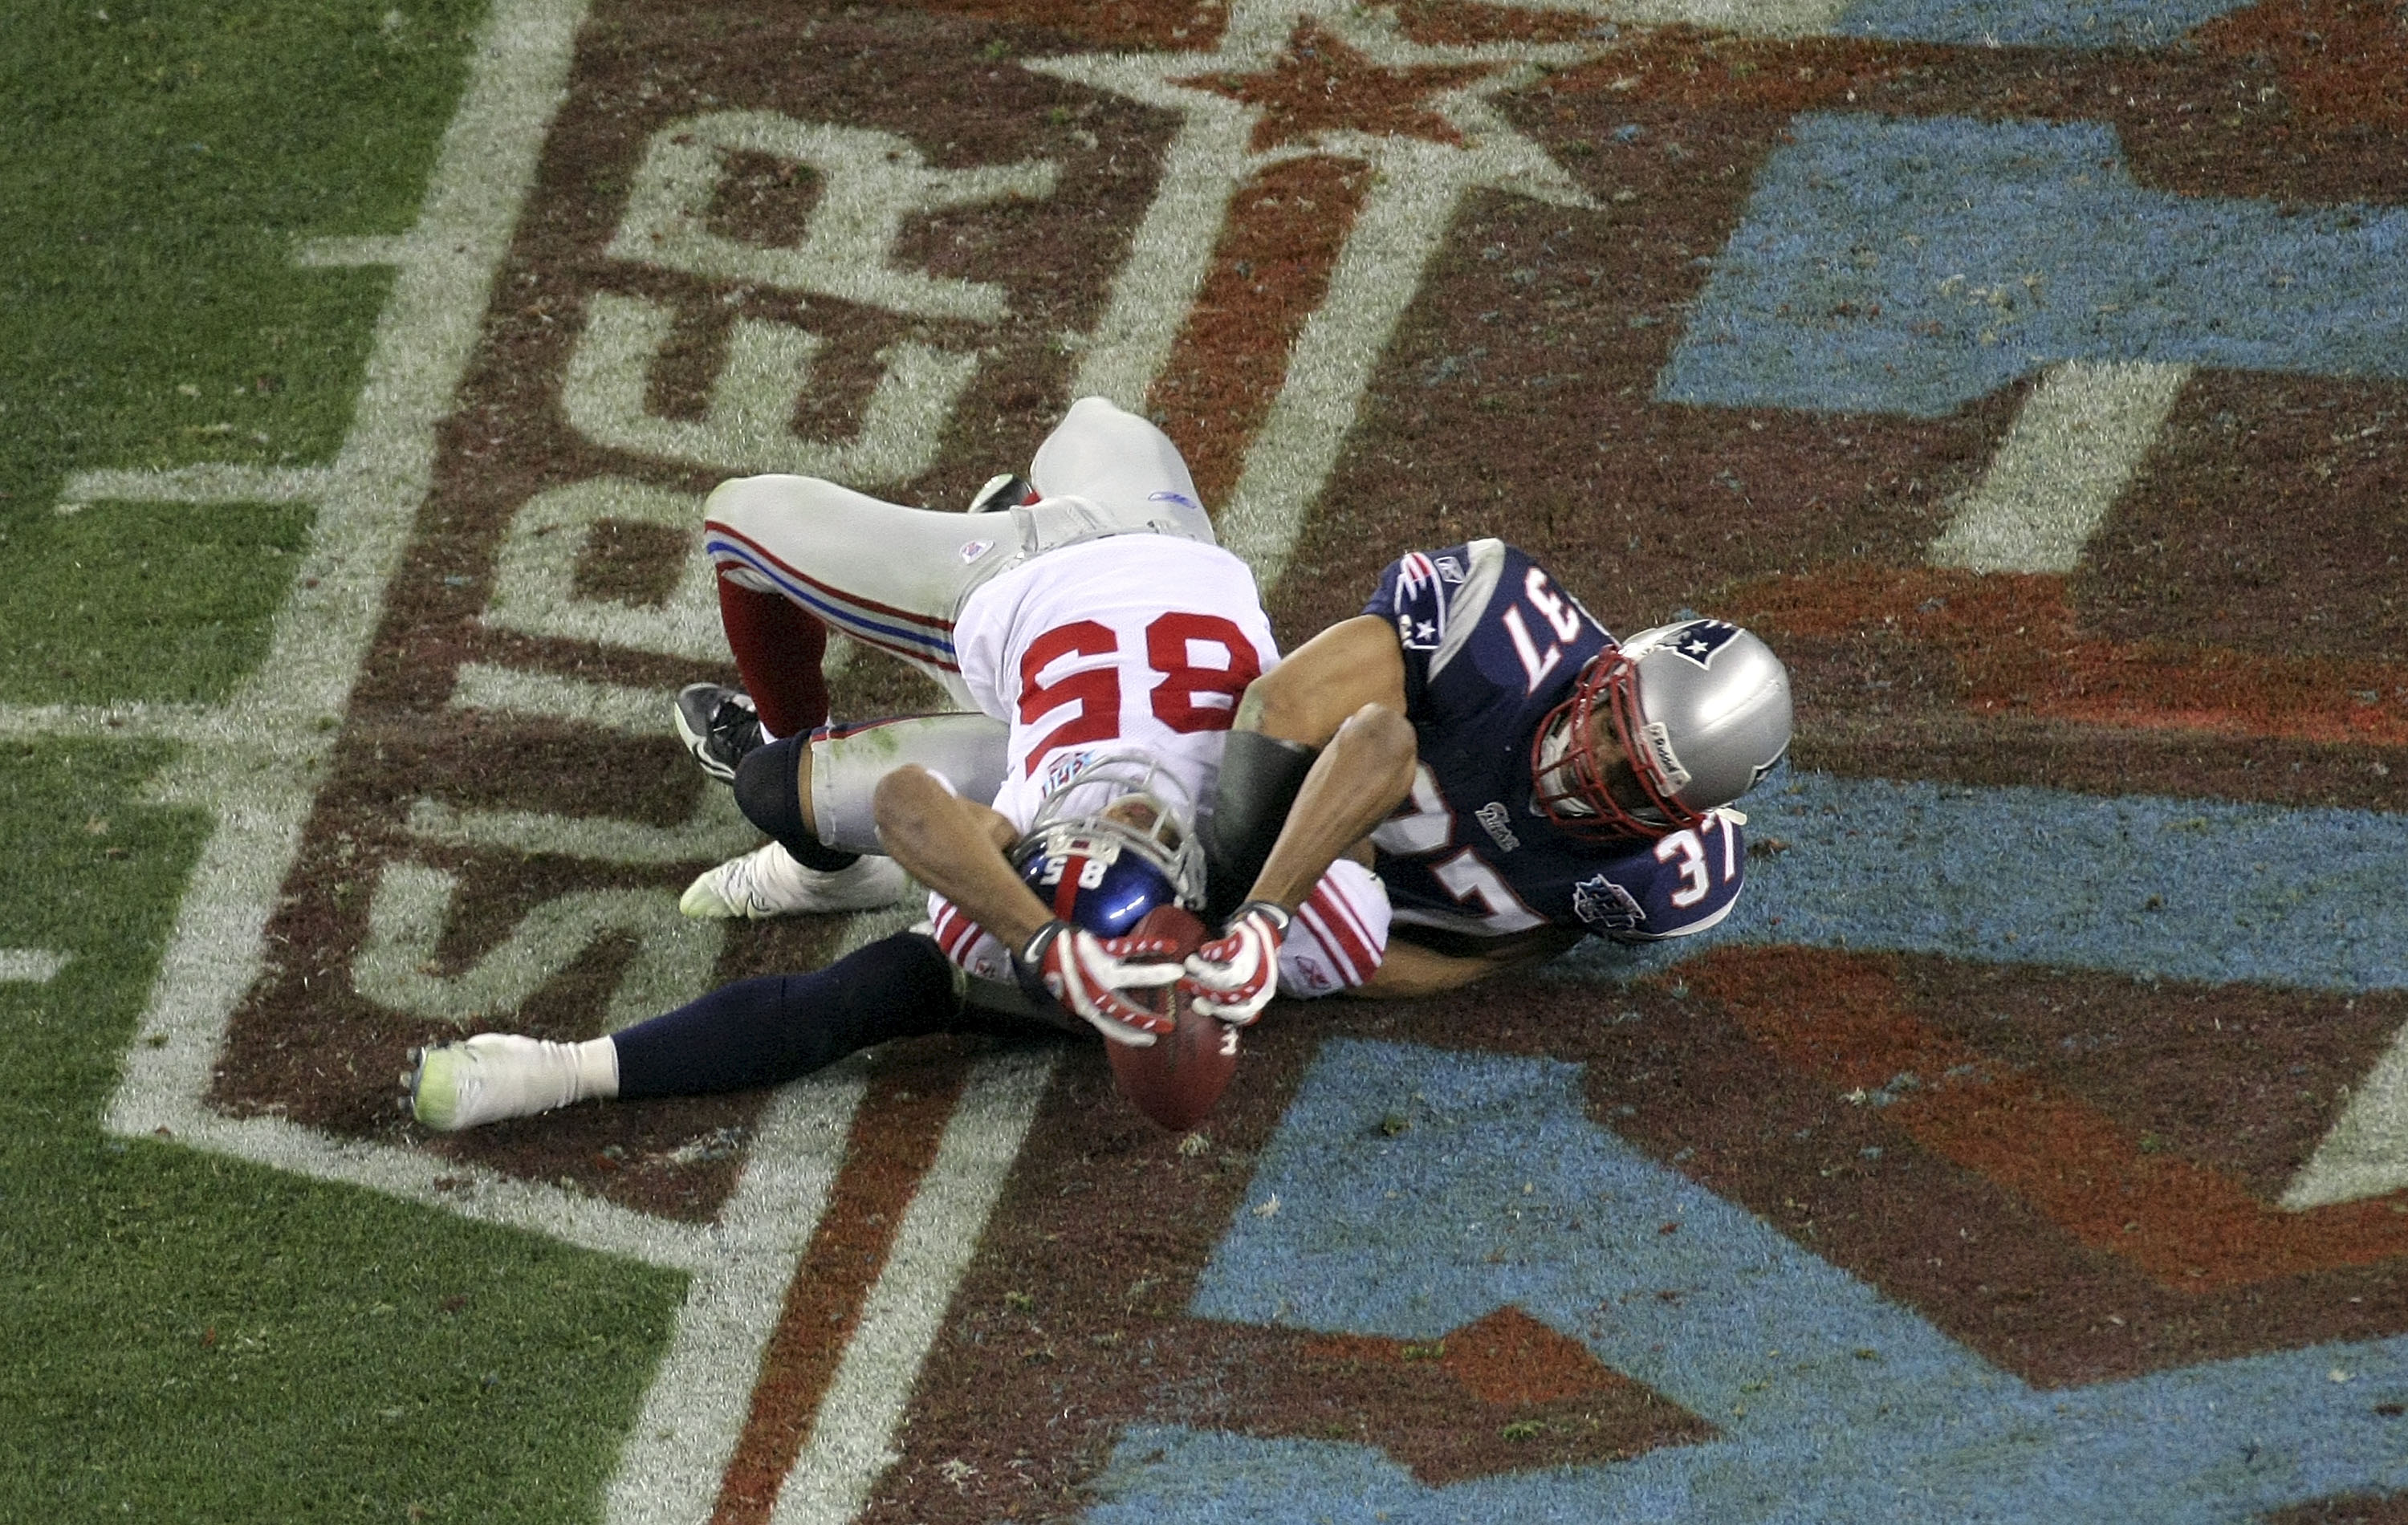 GLENDALE, AZ - FEBRUARY 03:  David Tyree #85 of the New York Giants catches a 32-yard pass from Eli Manning #10 as Rodney Harrison #37 of the New England Patriots attempts to knock it out in the fourth quarter of Super Bowl XLII on February 3, 2008 at the